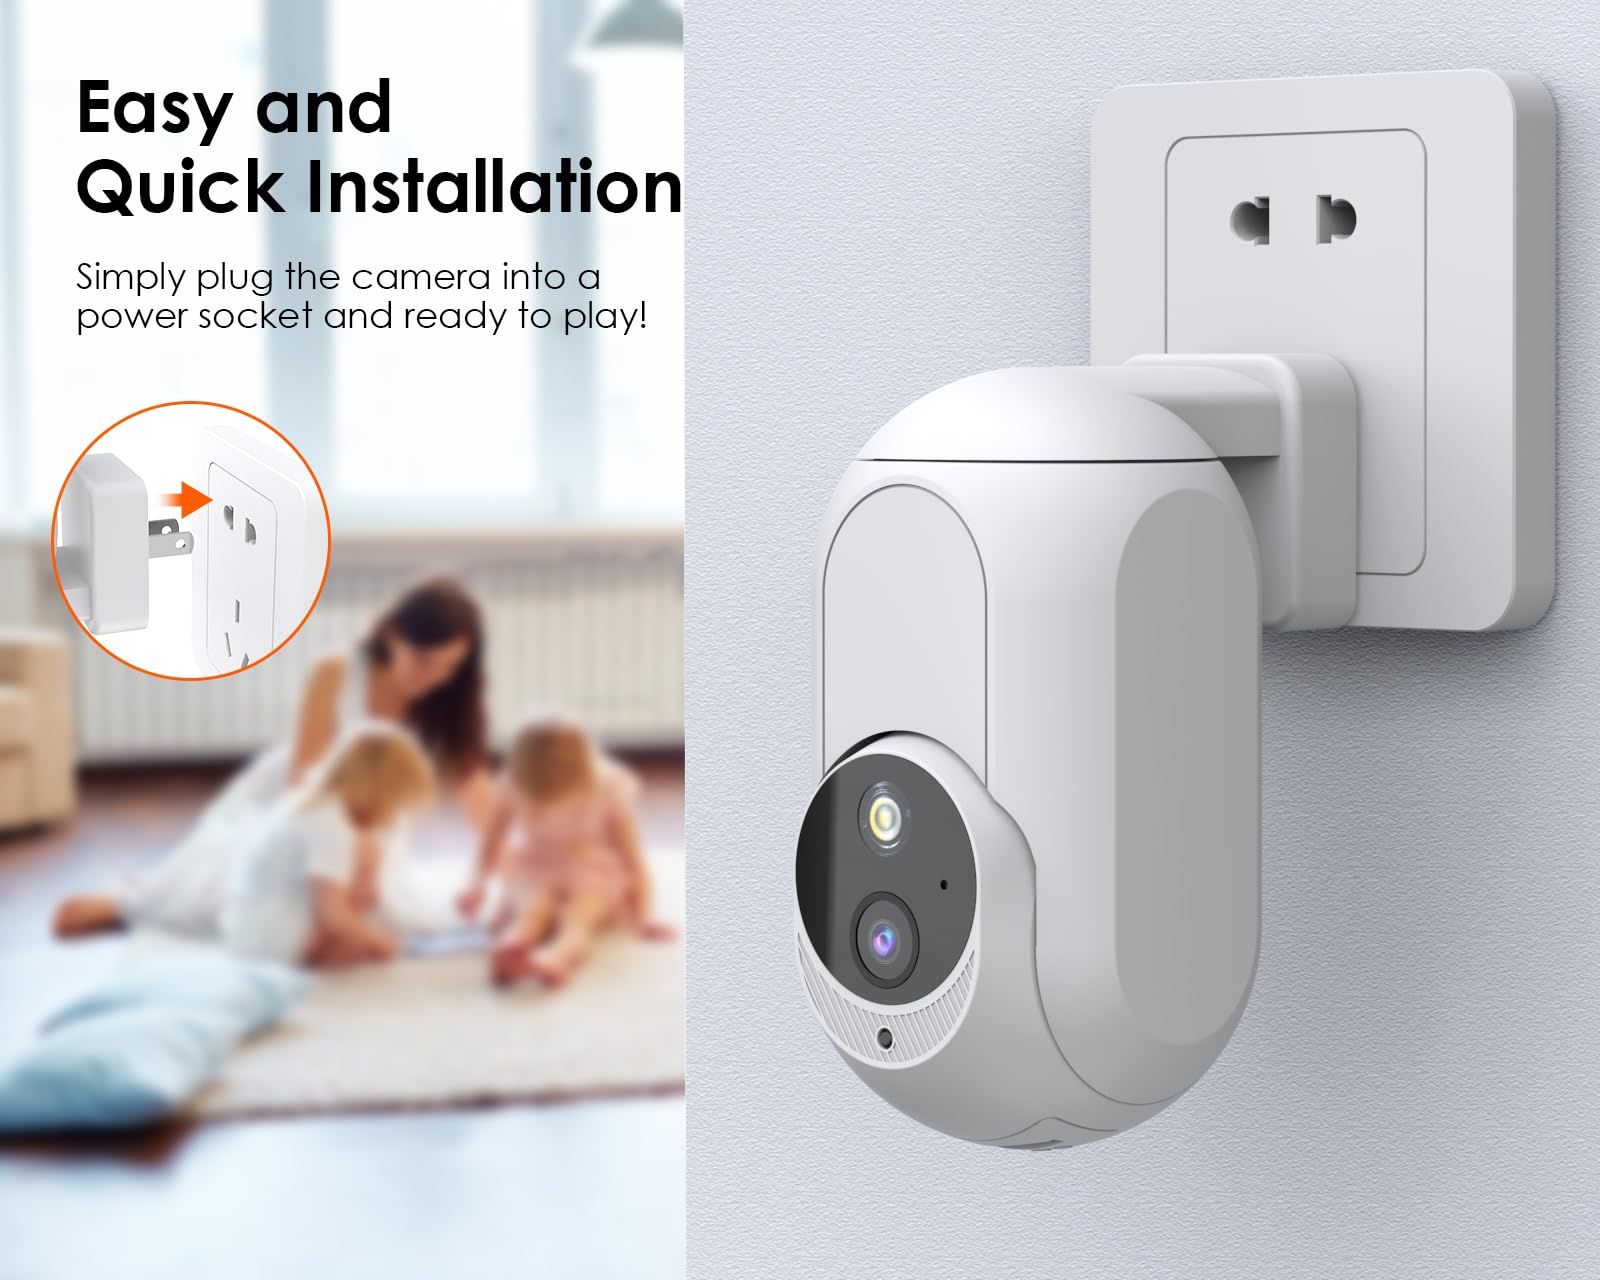 P Panoraxy AI 2K 3MP WiFi Security Indoor Camera, Wireless Plug in Camera, 24/7 Human&Sound Detection, 2.4G PTZ Pet Camera, Dual-Way Talk, Color Night Vision, Compatible with Alexa & Google Home